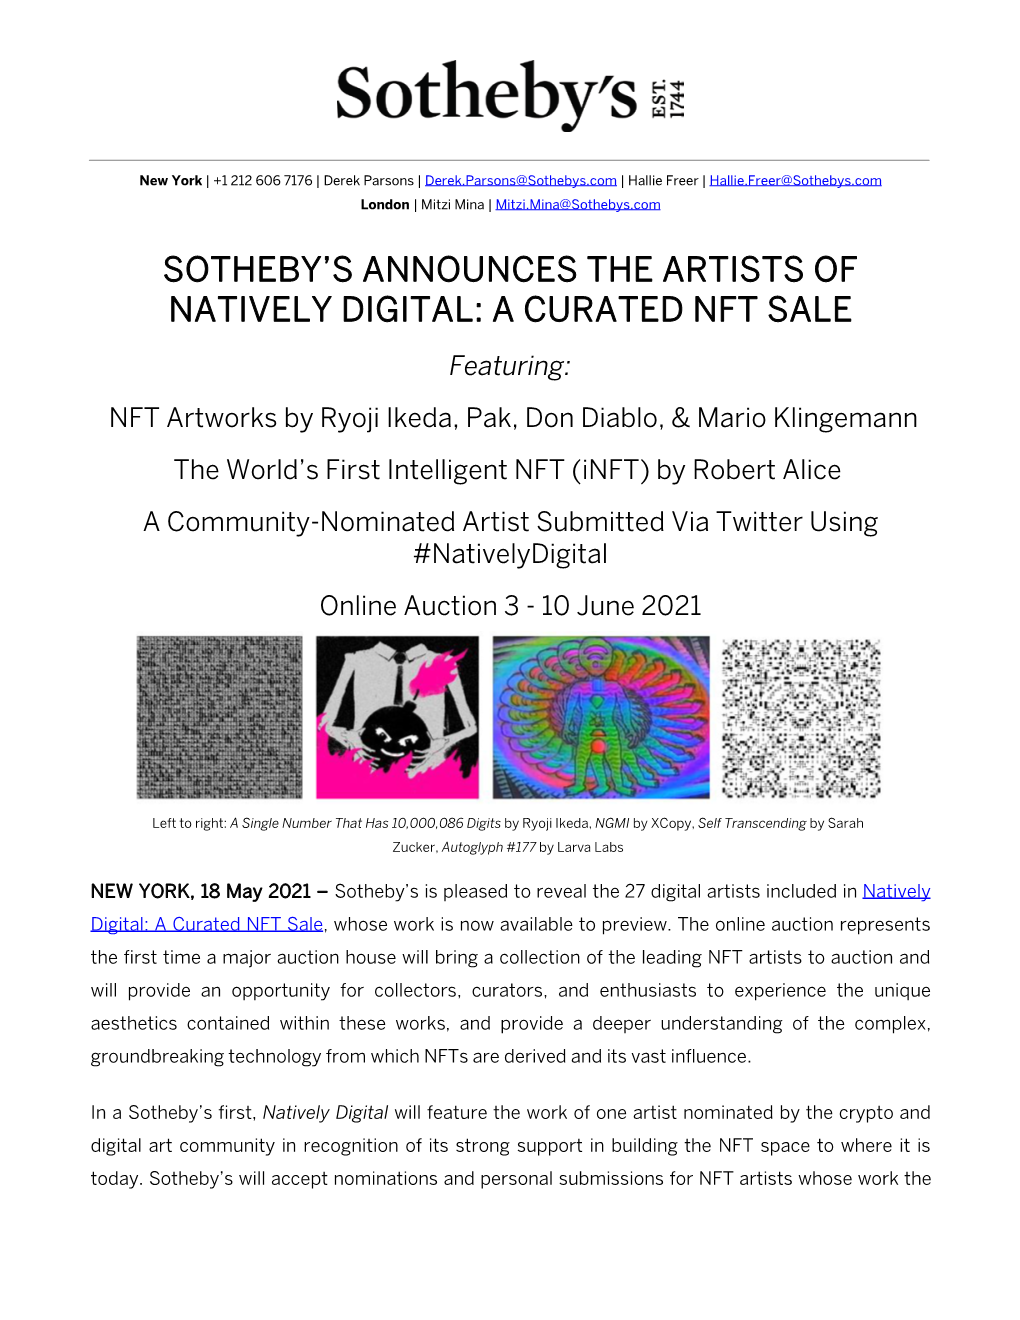 Sotheby's Press Release